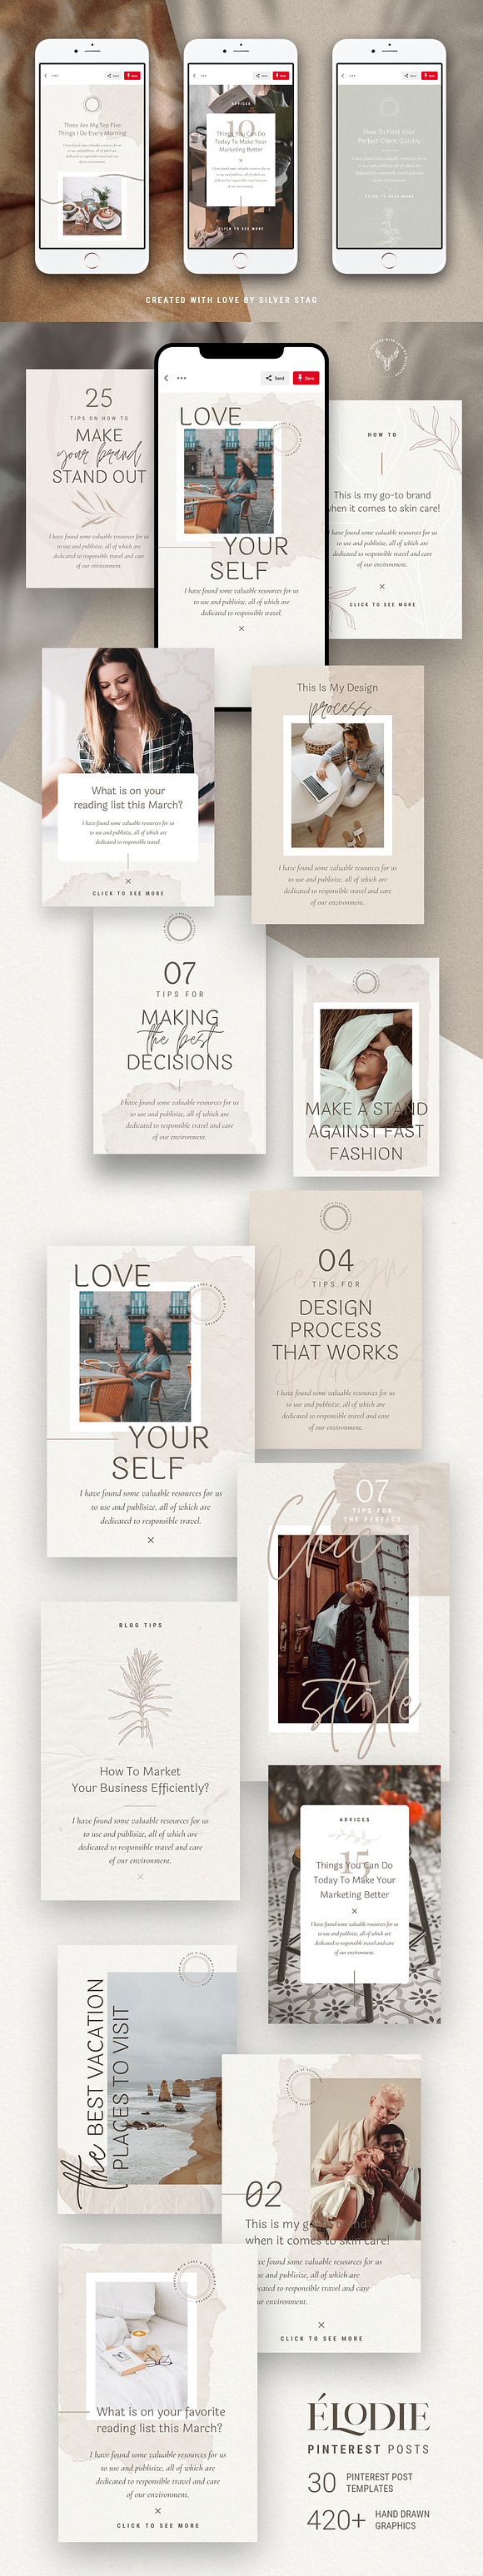 Elodie - Canva Pinterest Templates in Pinterest Templates - product preview 13